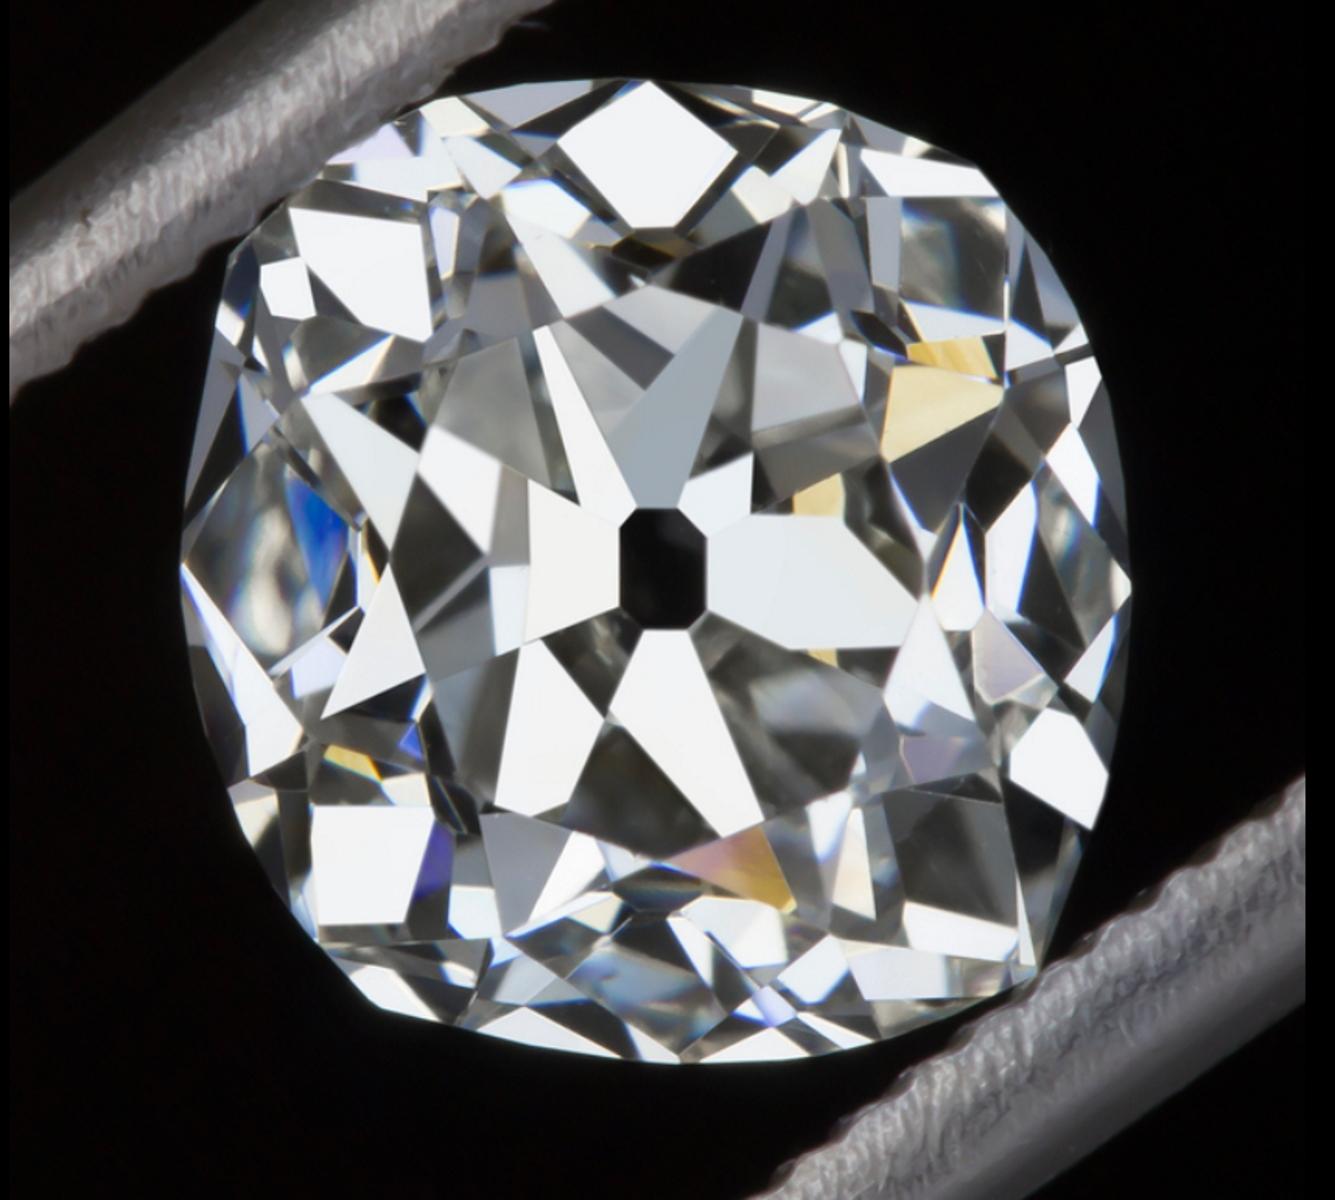 This 0.90 carat old mine cut diamond has charmingly wide hand cut facets! This high quality certified H Color and  si2 diamond is brilliantly white, a rare feature in old cut diamonds. The diamond has a charming square shape, and the unique cut has